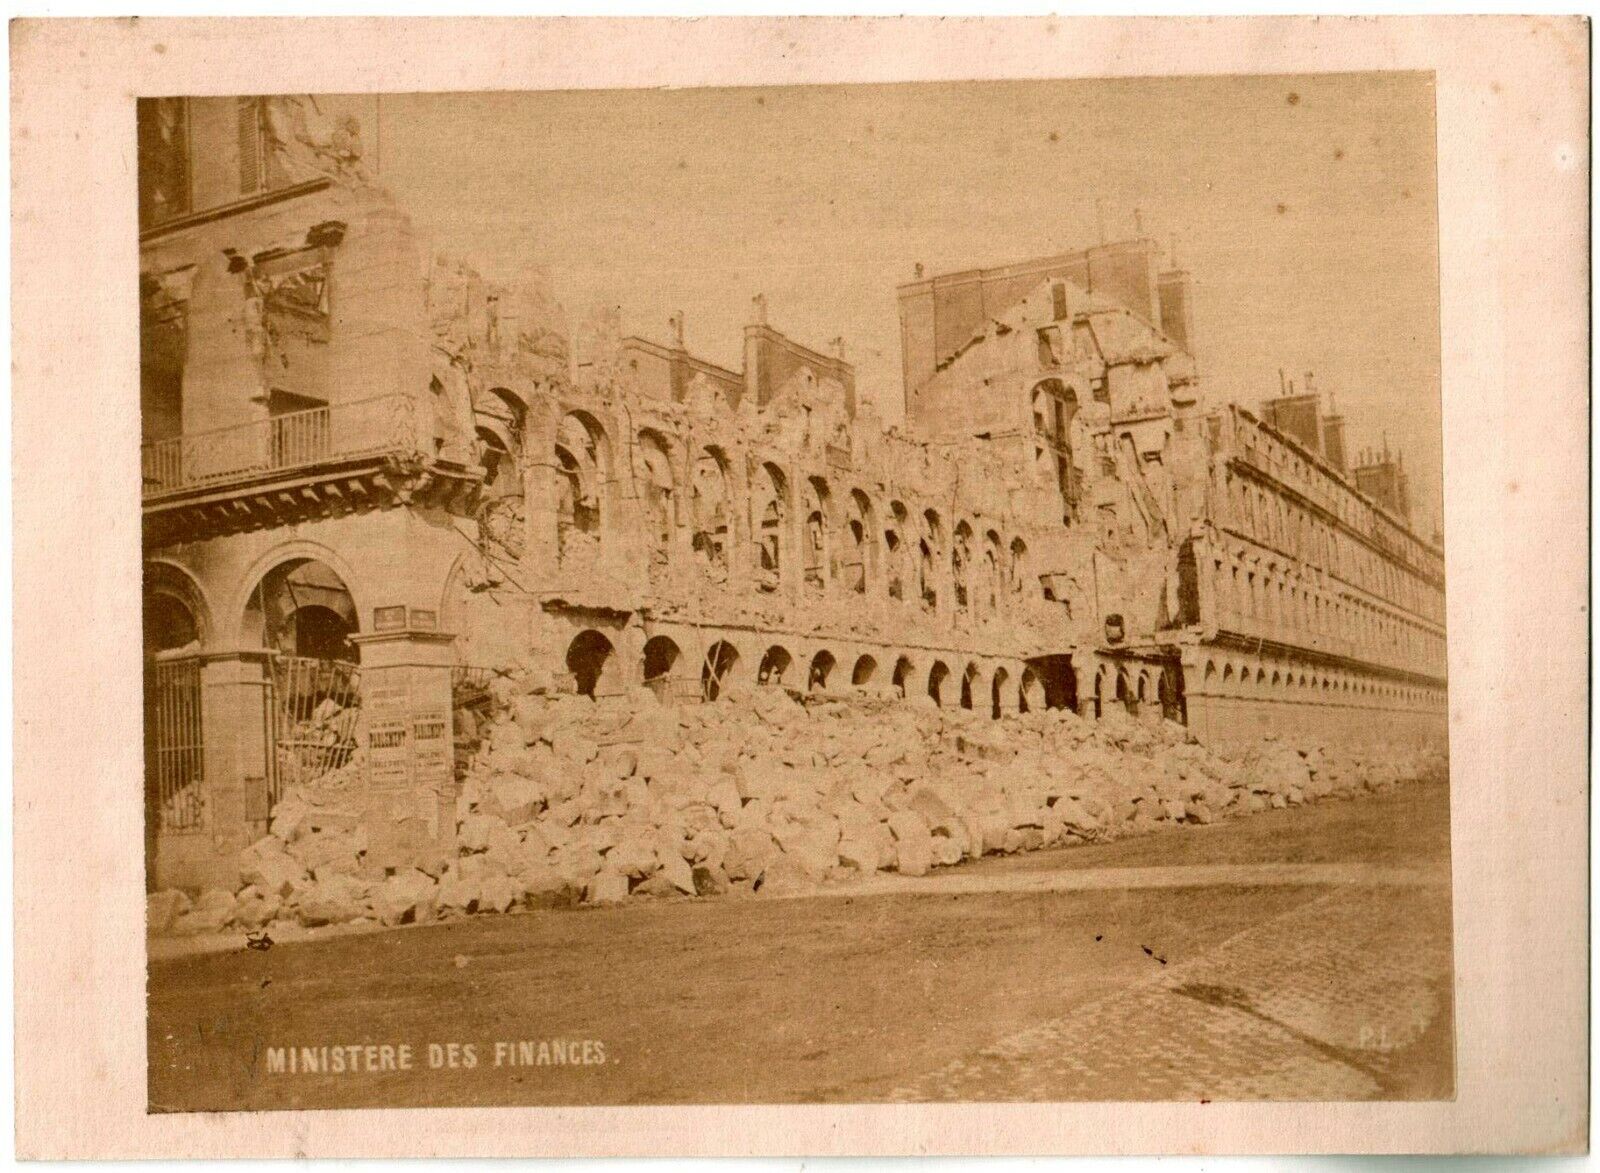 Paris Ruines May 1871.La Commune.Ministry of Finance.Albuminated photo Loubère.